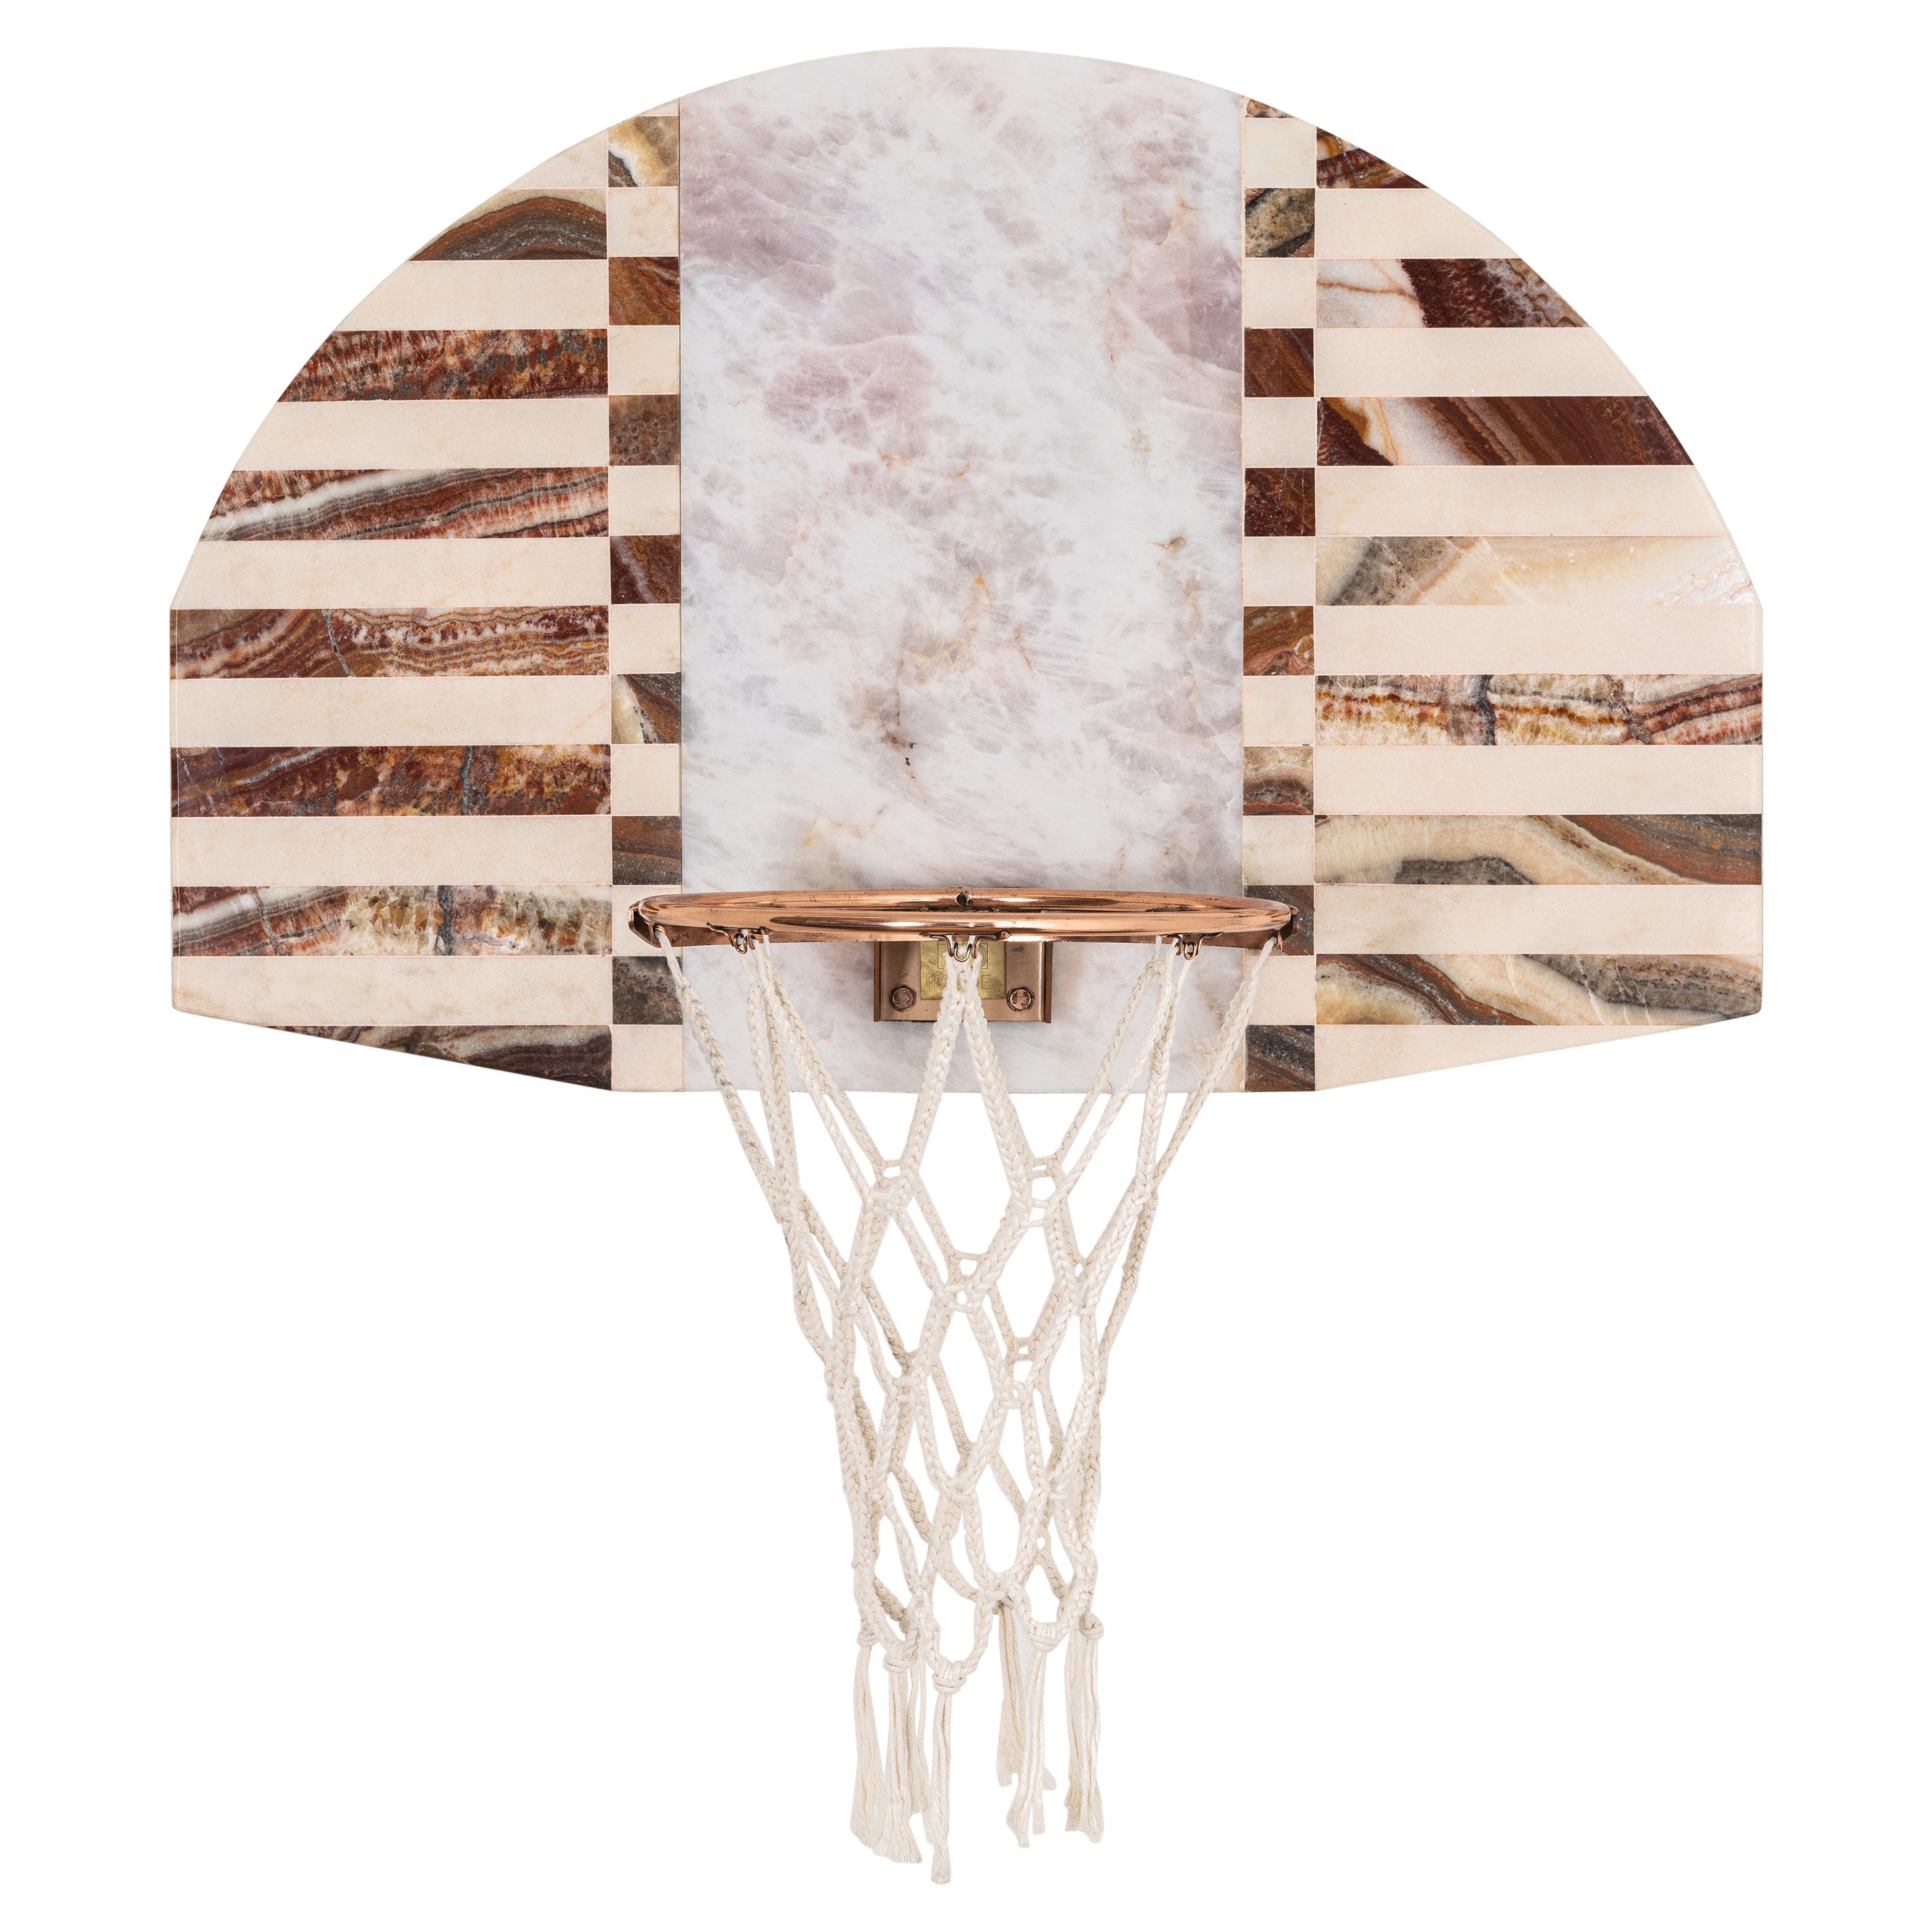 Lux Mini Hoops Made by Moniomi, Round Handcrafted Marble Basketball Hoop